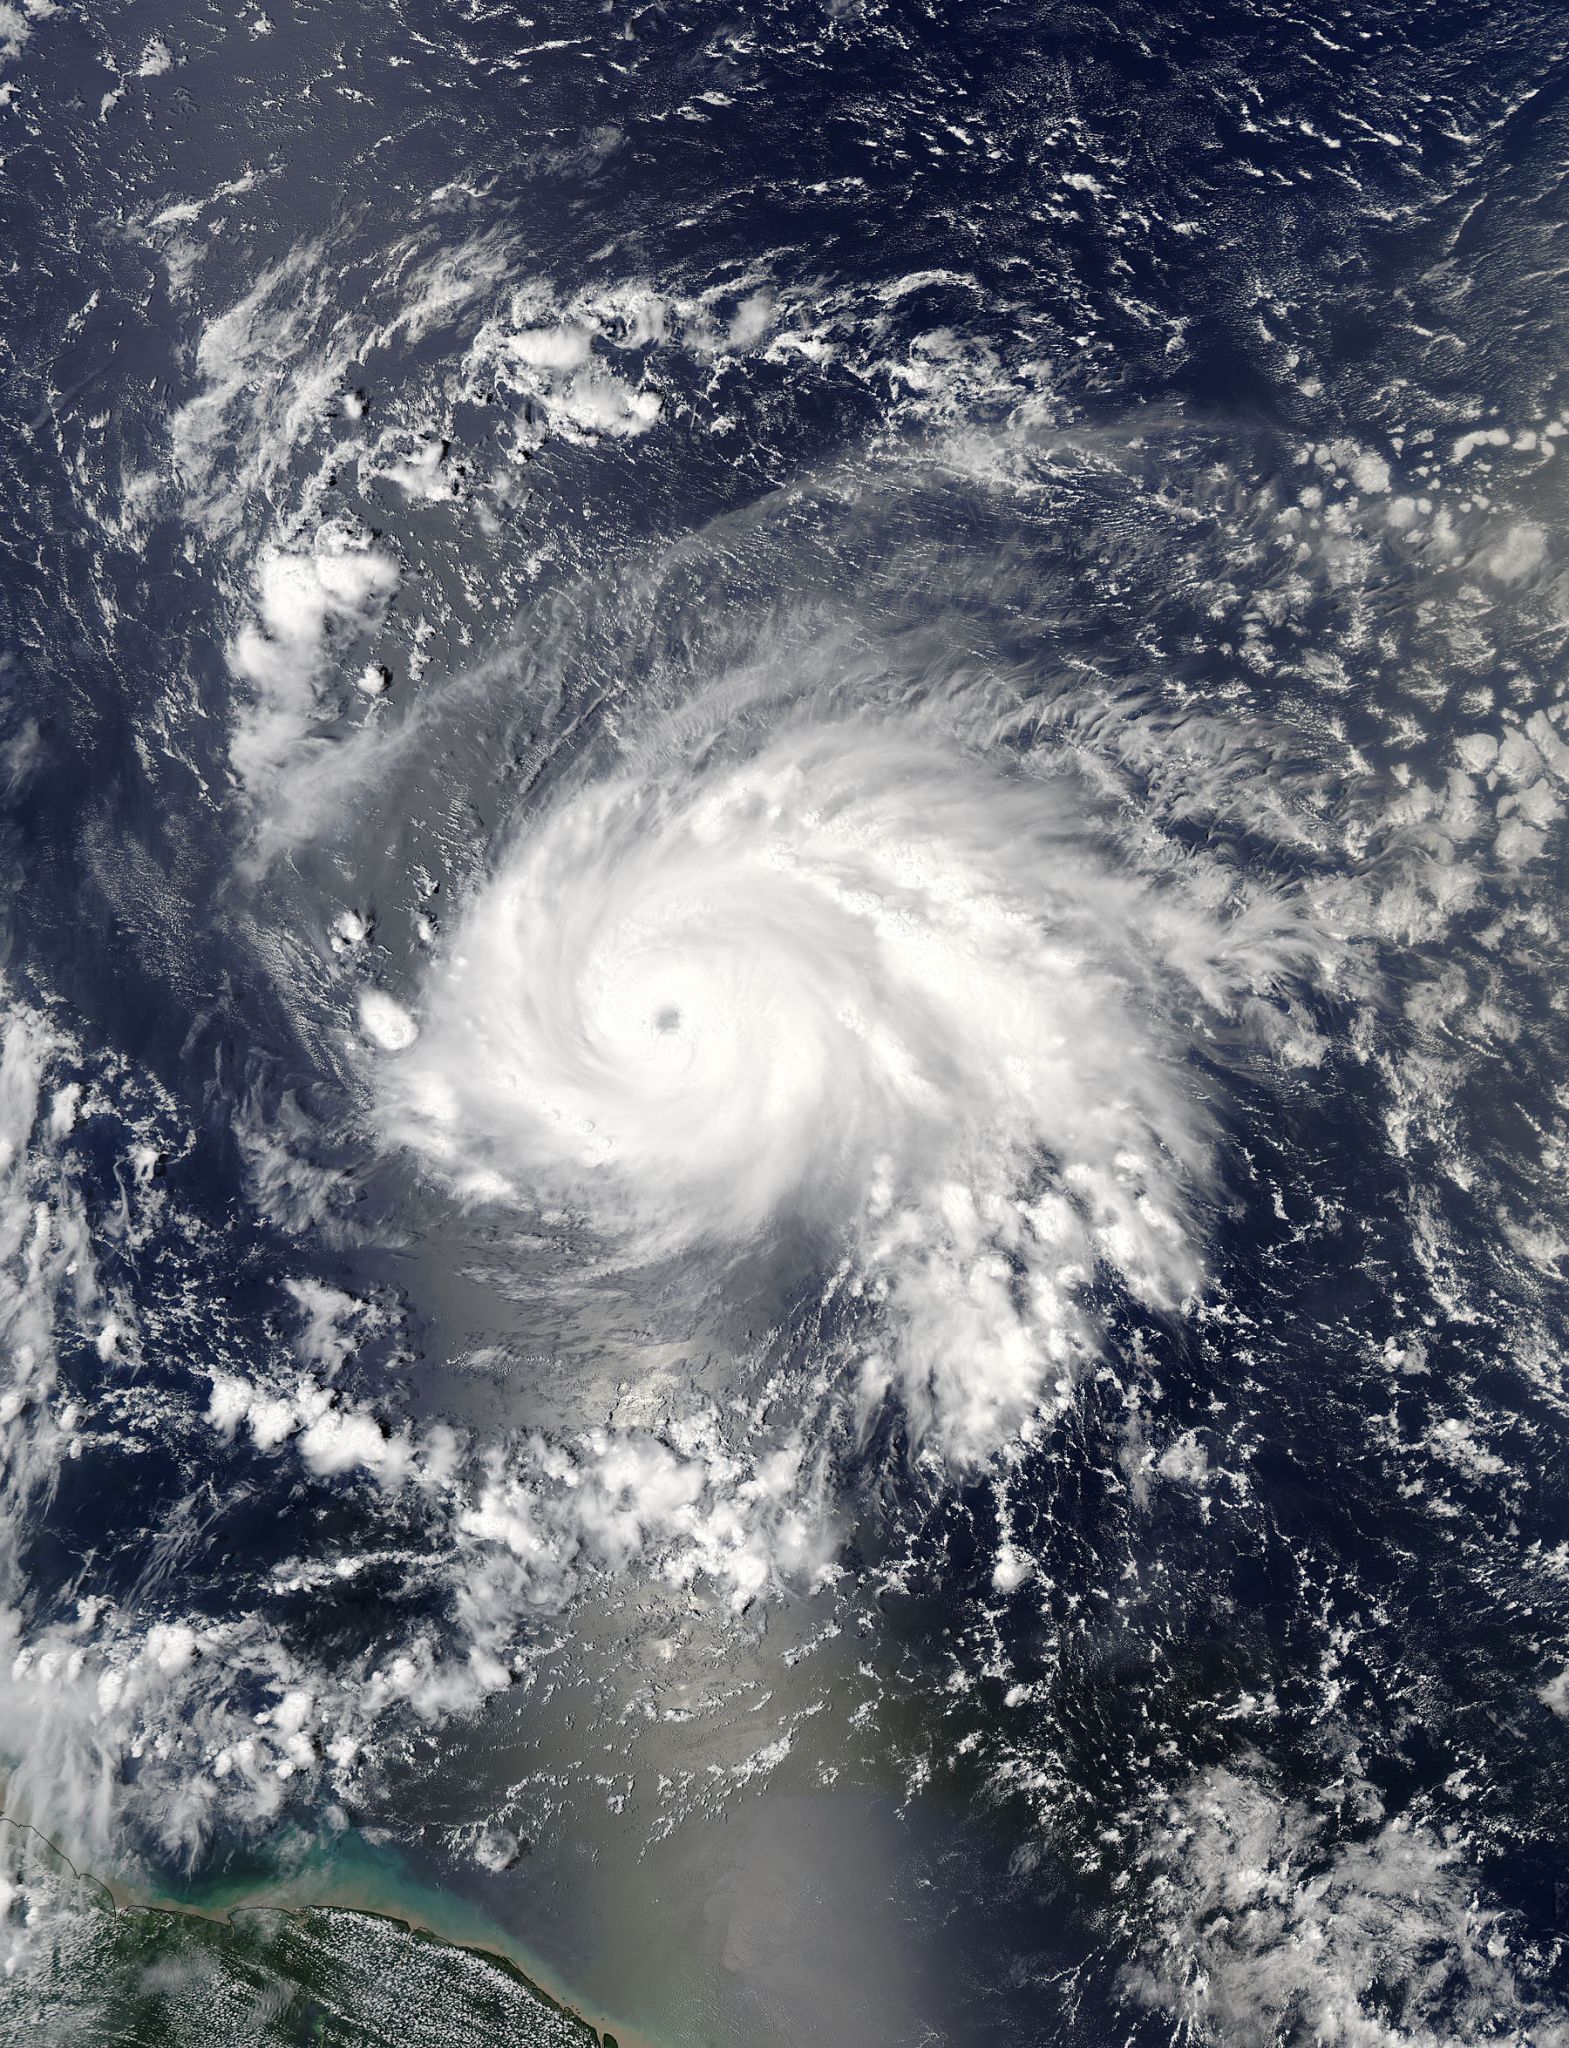 Satellite image of Jose, a swirling cloud mass with a clear eye, over the ocean.